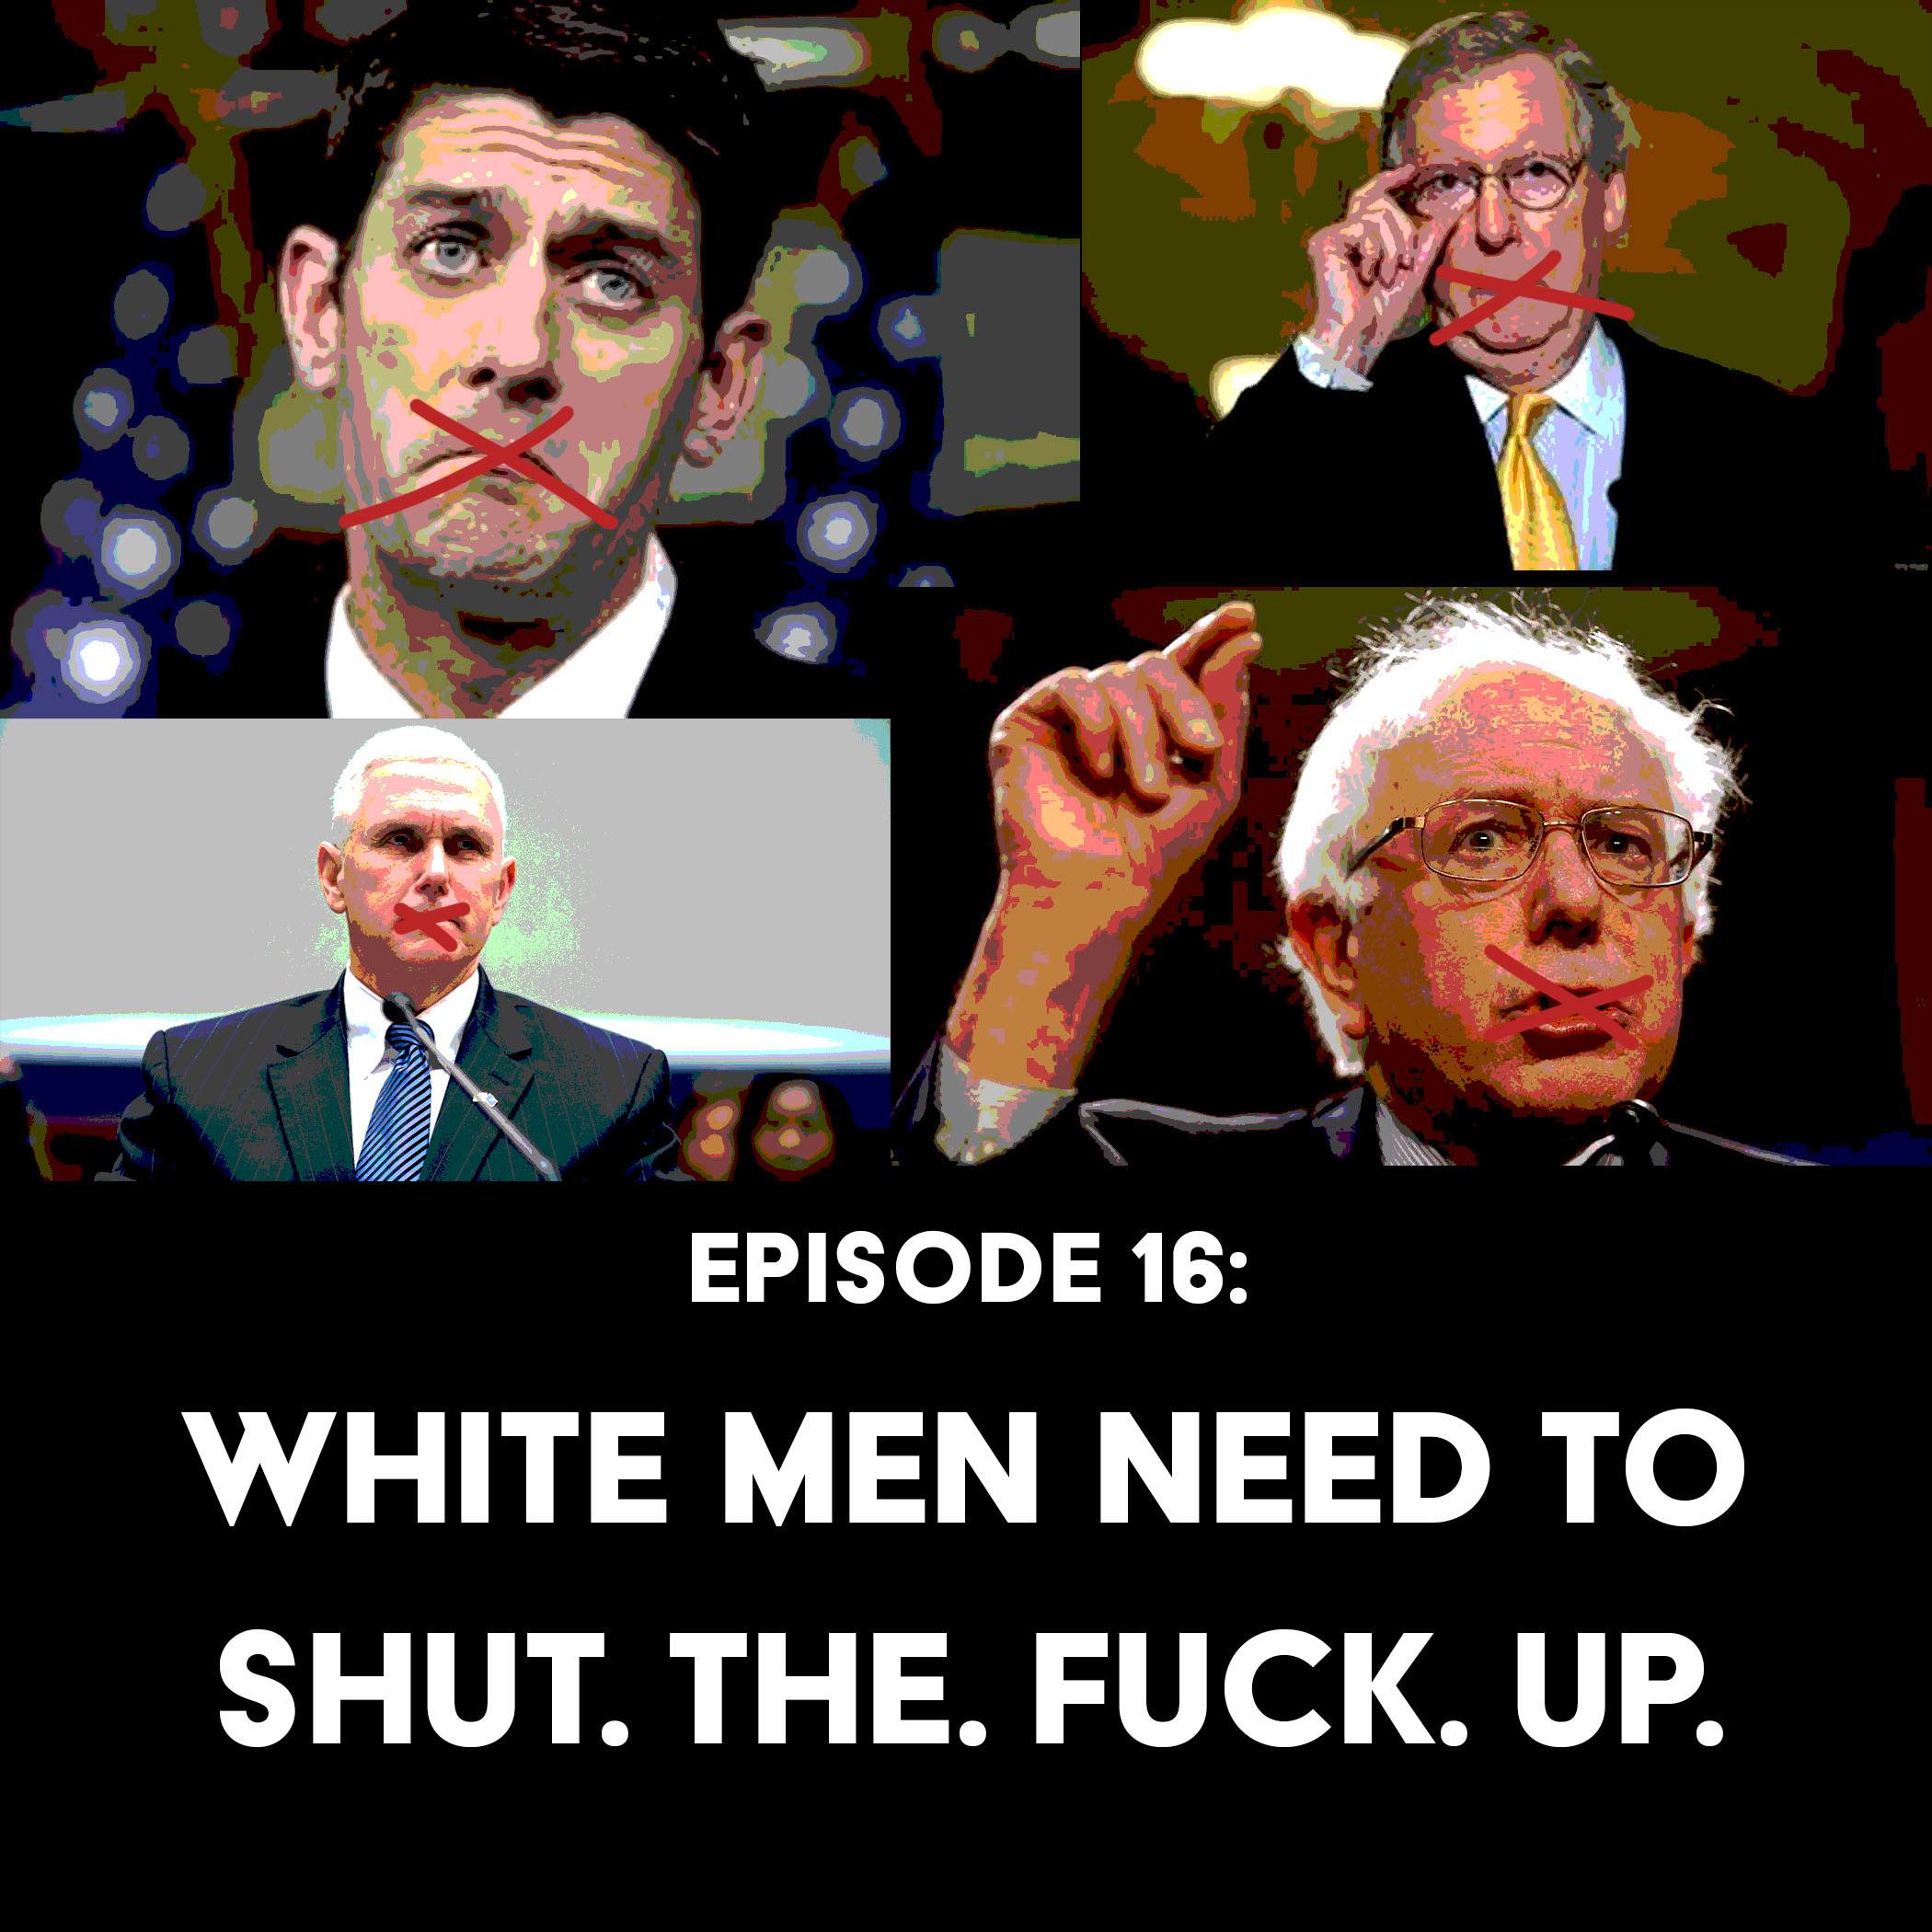 Episode 16: White Men Need to Shut The Fuck Up